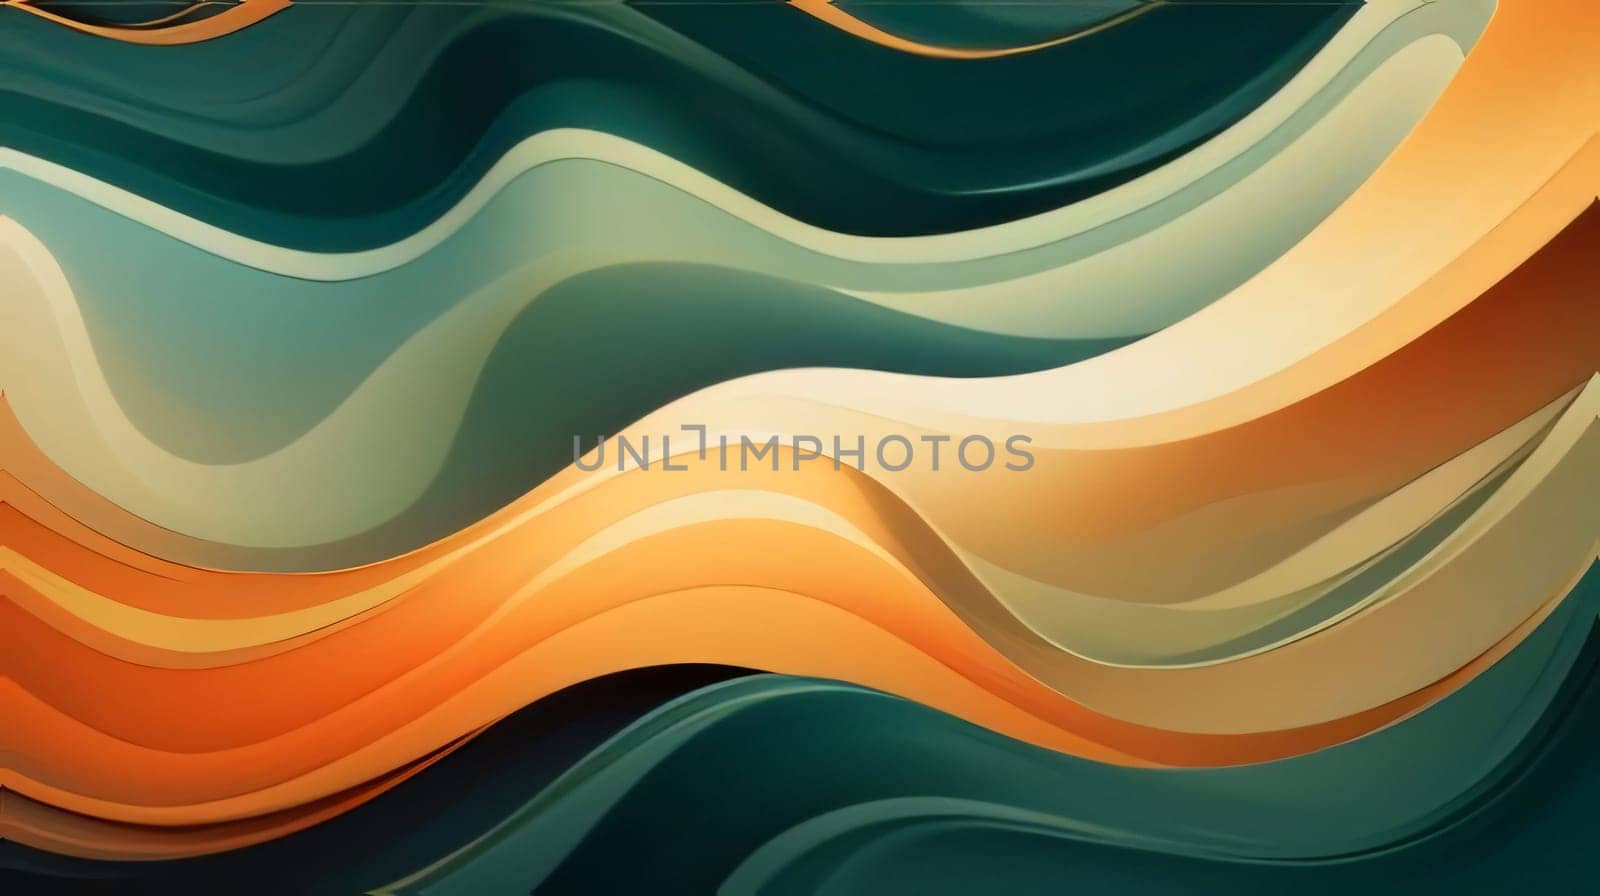 Abstract background design: abstract background with smooth lines in turquoise and orange colors